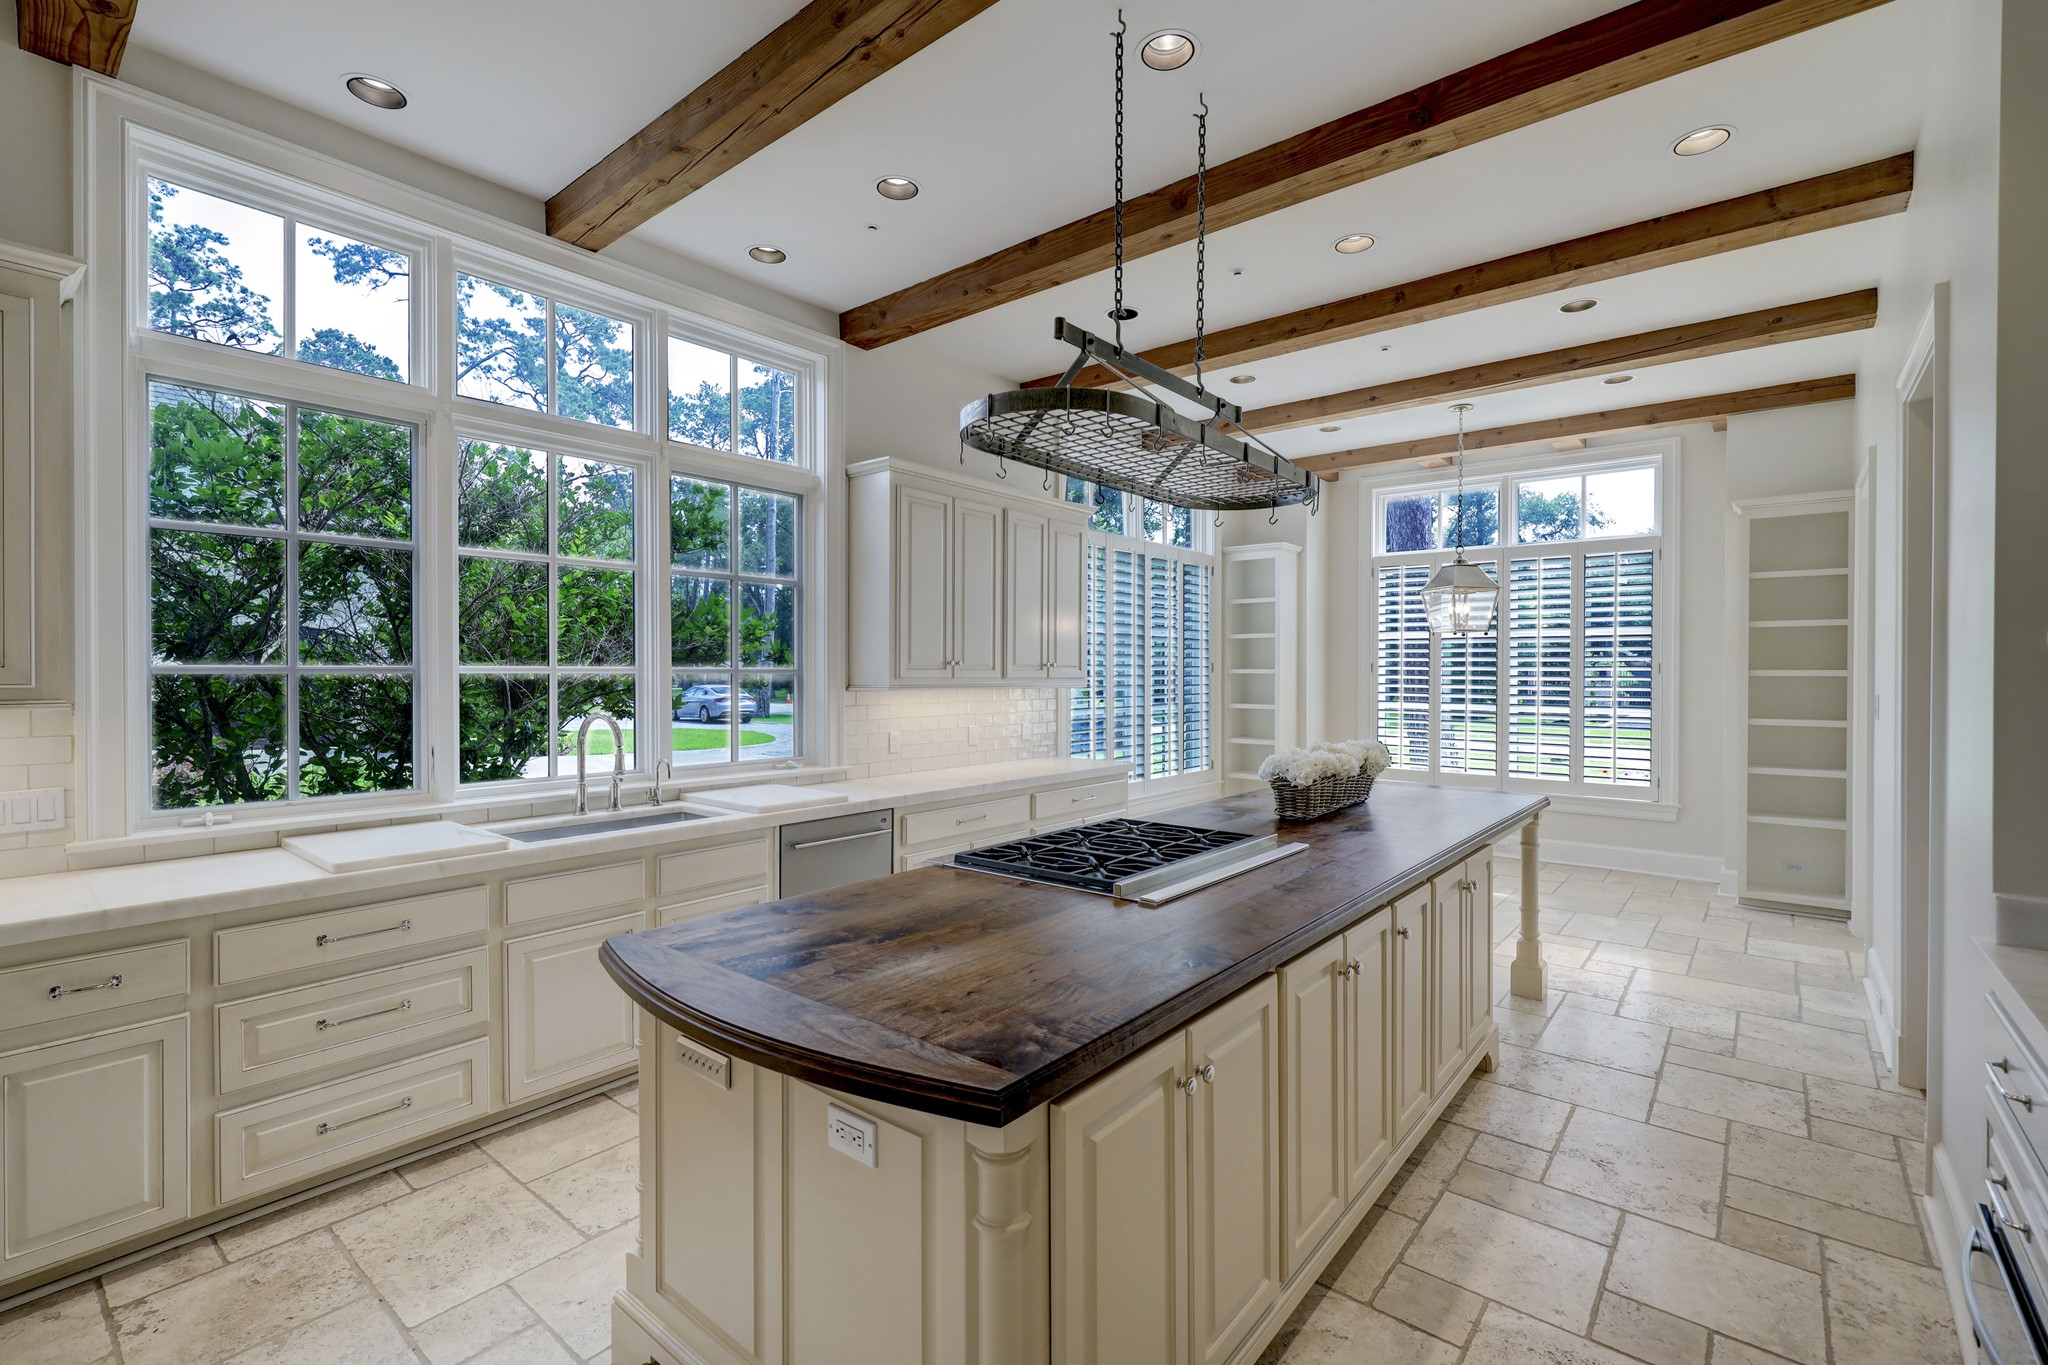 Light filled Kitchen with beautiful finishes including marble countertops, wood island, subway tile backsplash, and limestone floors.